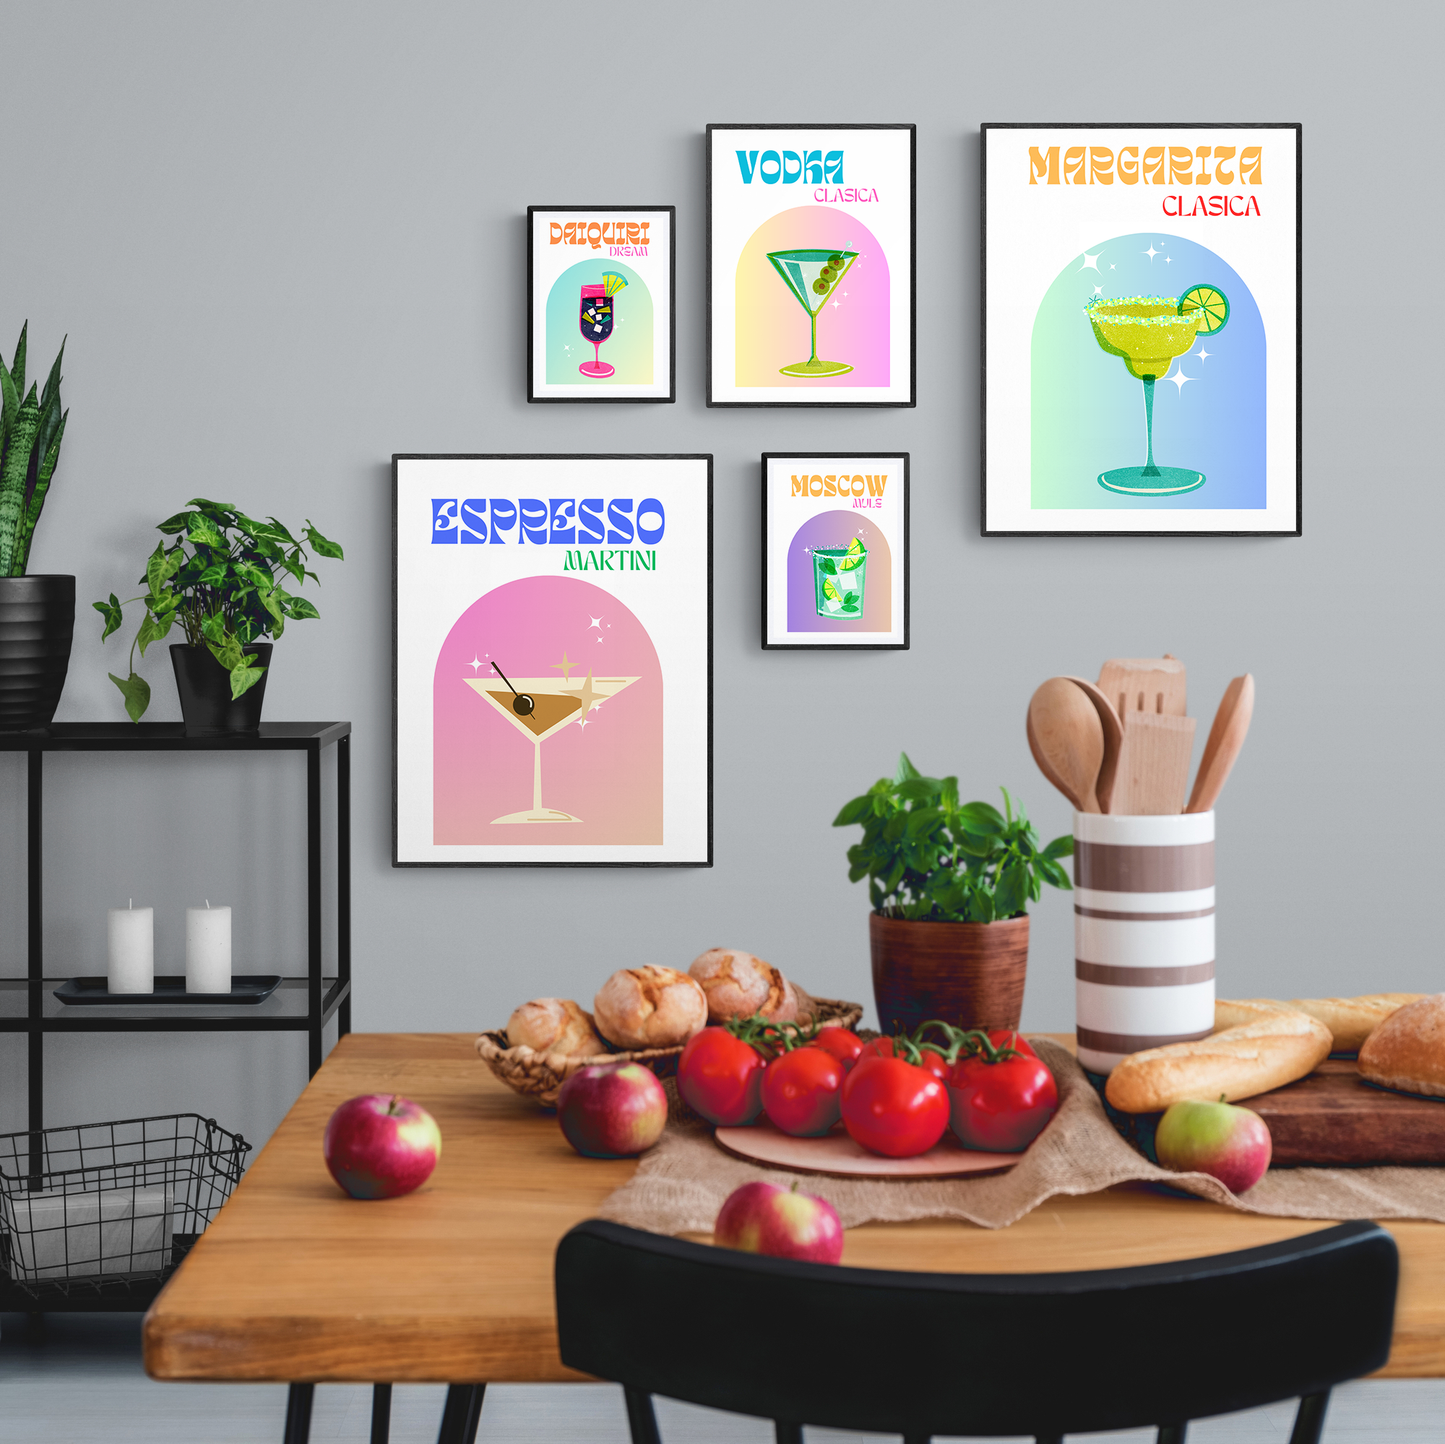 Cocktail-lovers unite! Quench your thirst for art with our Amaretto Cocktail Print! With recipes from popular artists and posters of popular subjects, this wall art is the perfect nursery-to-kitchen pick-me-up. Discover colorful illustrations, retro posters, and boozy botanical surprises that will make your bar cart jealous. Gift it, or keep it all to yourself. Cheers!